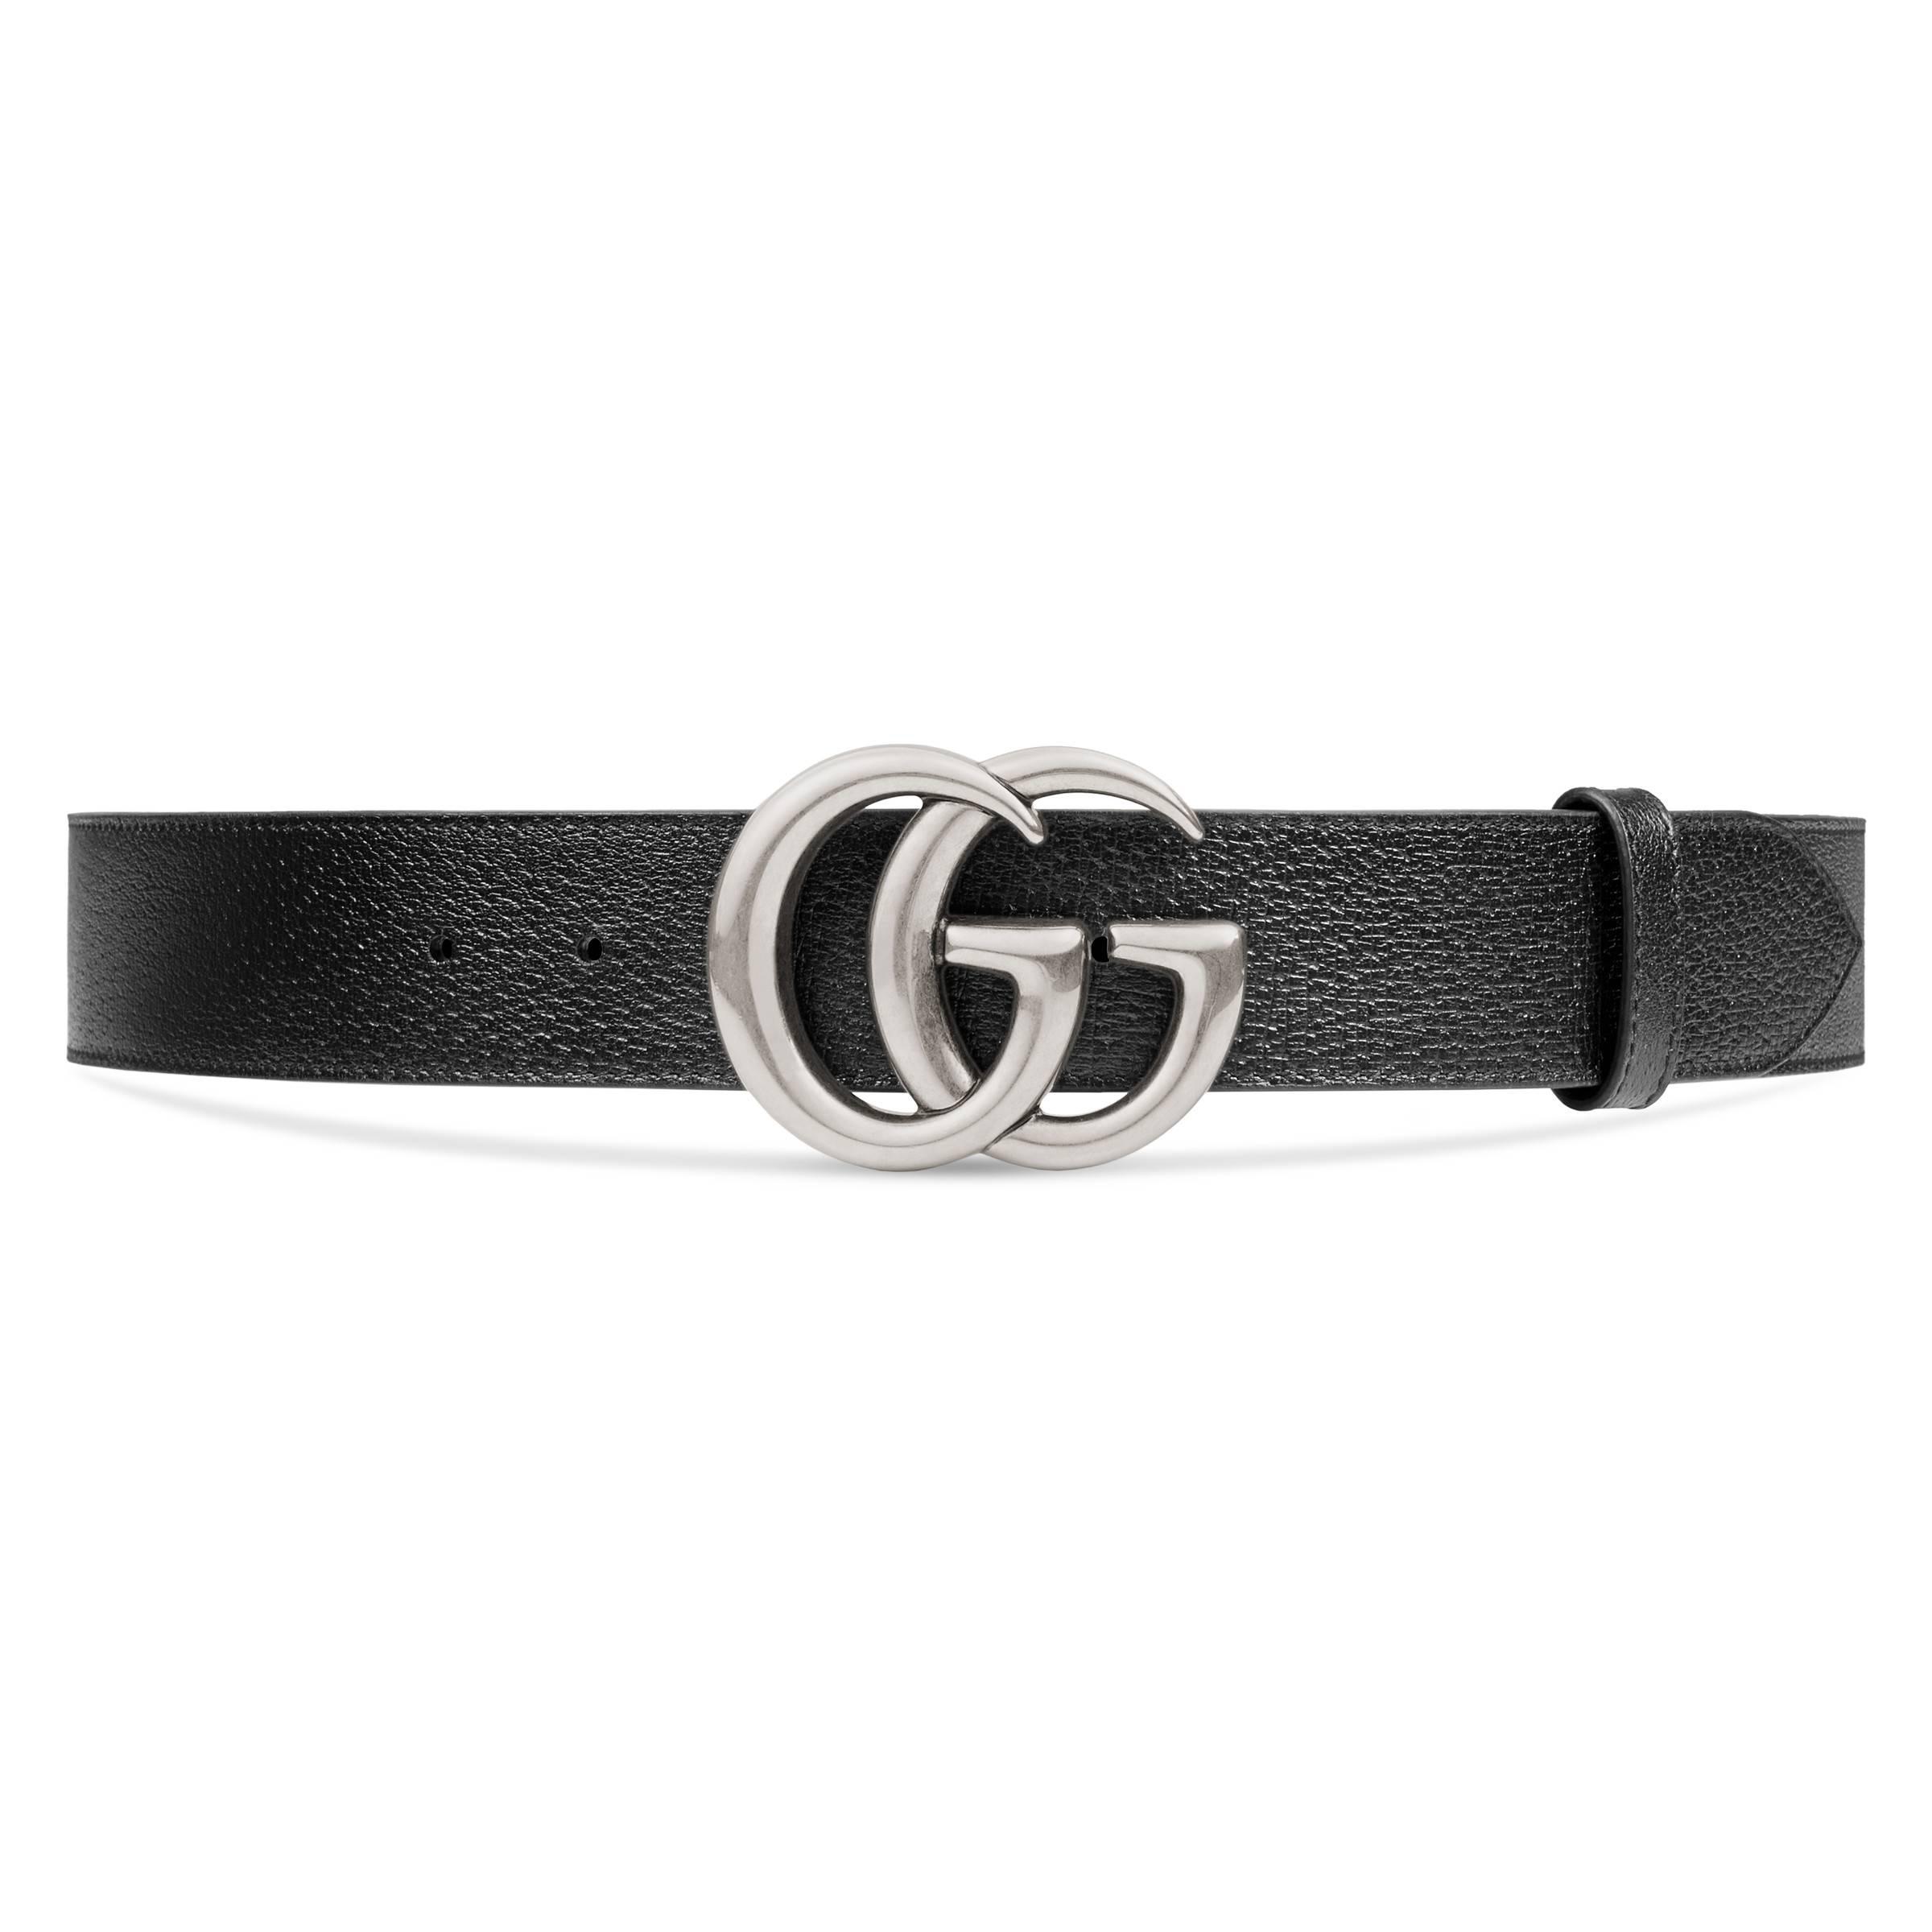 Gucci Leather Belt With Double G Buckle in Black for Men - Lyst